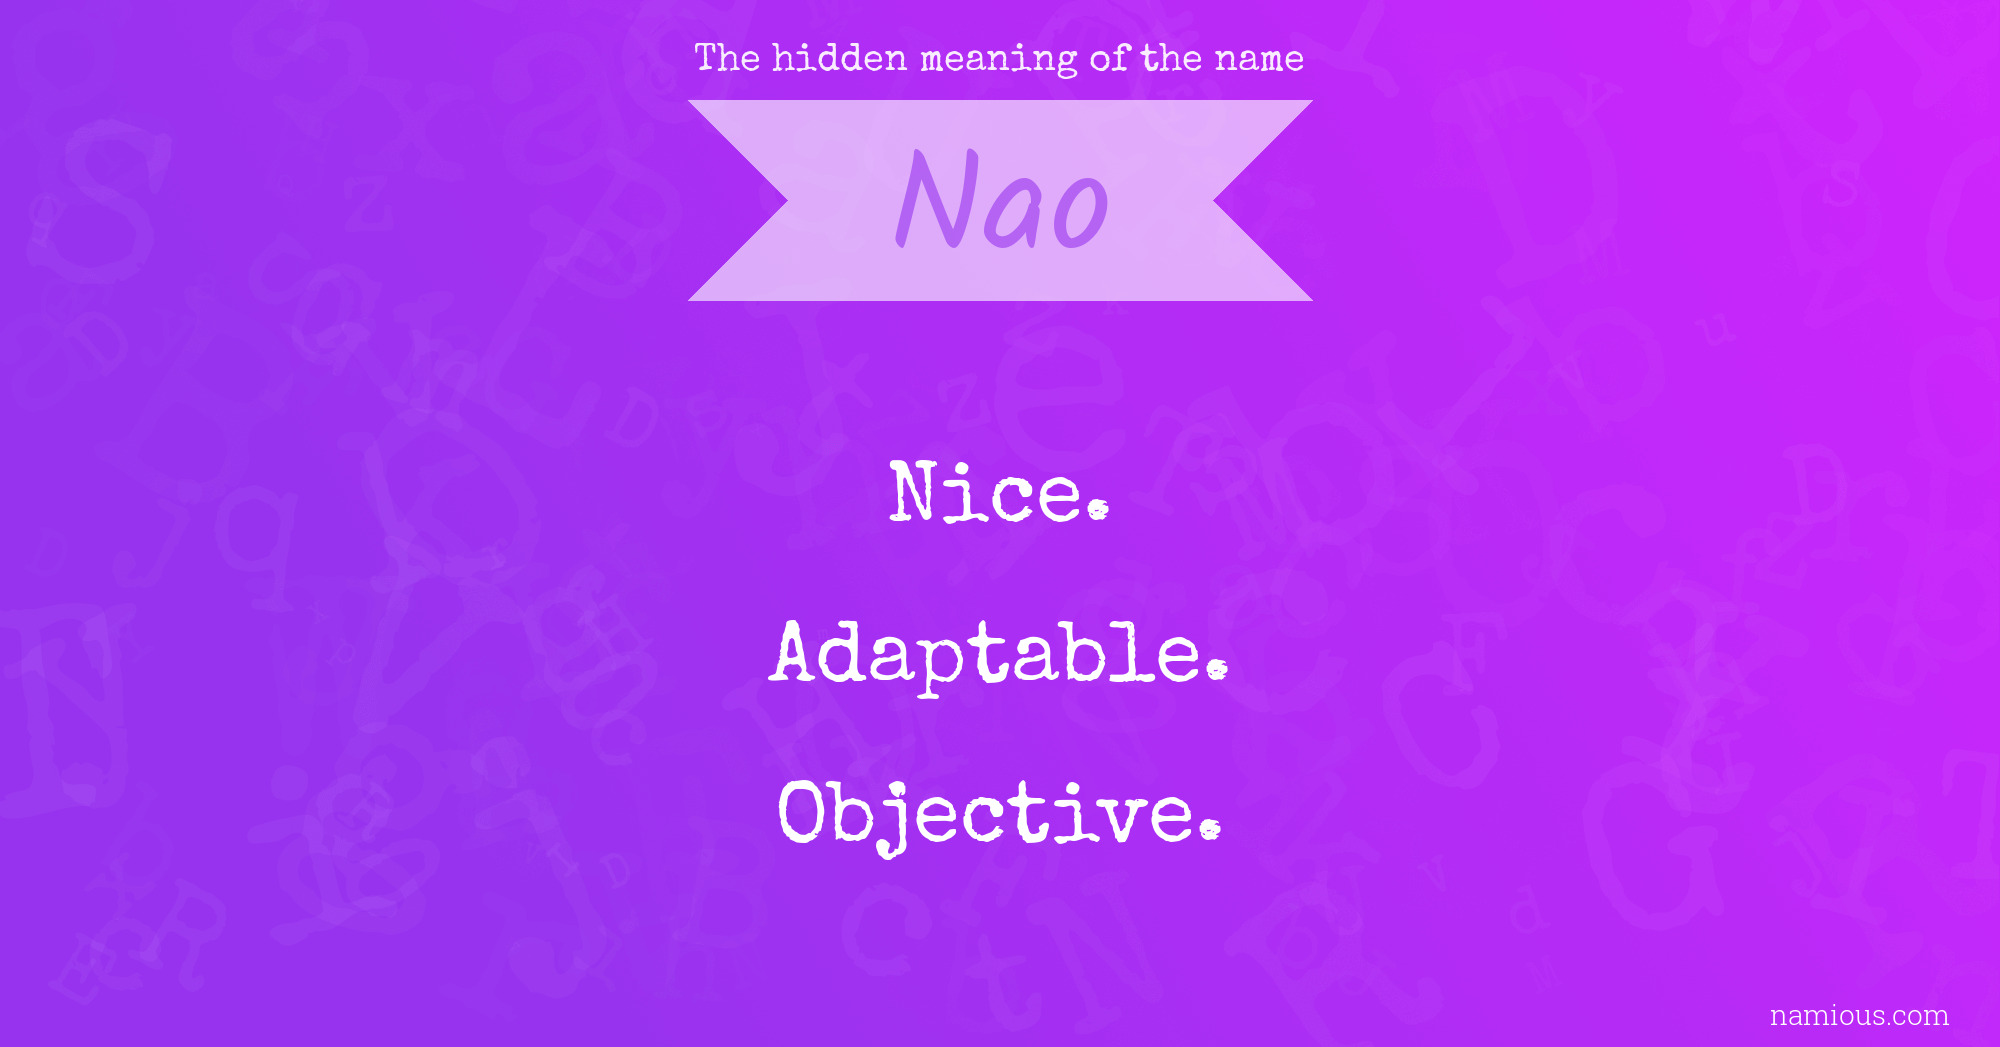 The hidden meaning of the name Nao